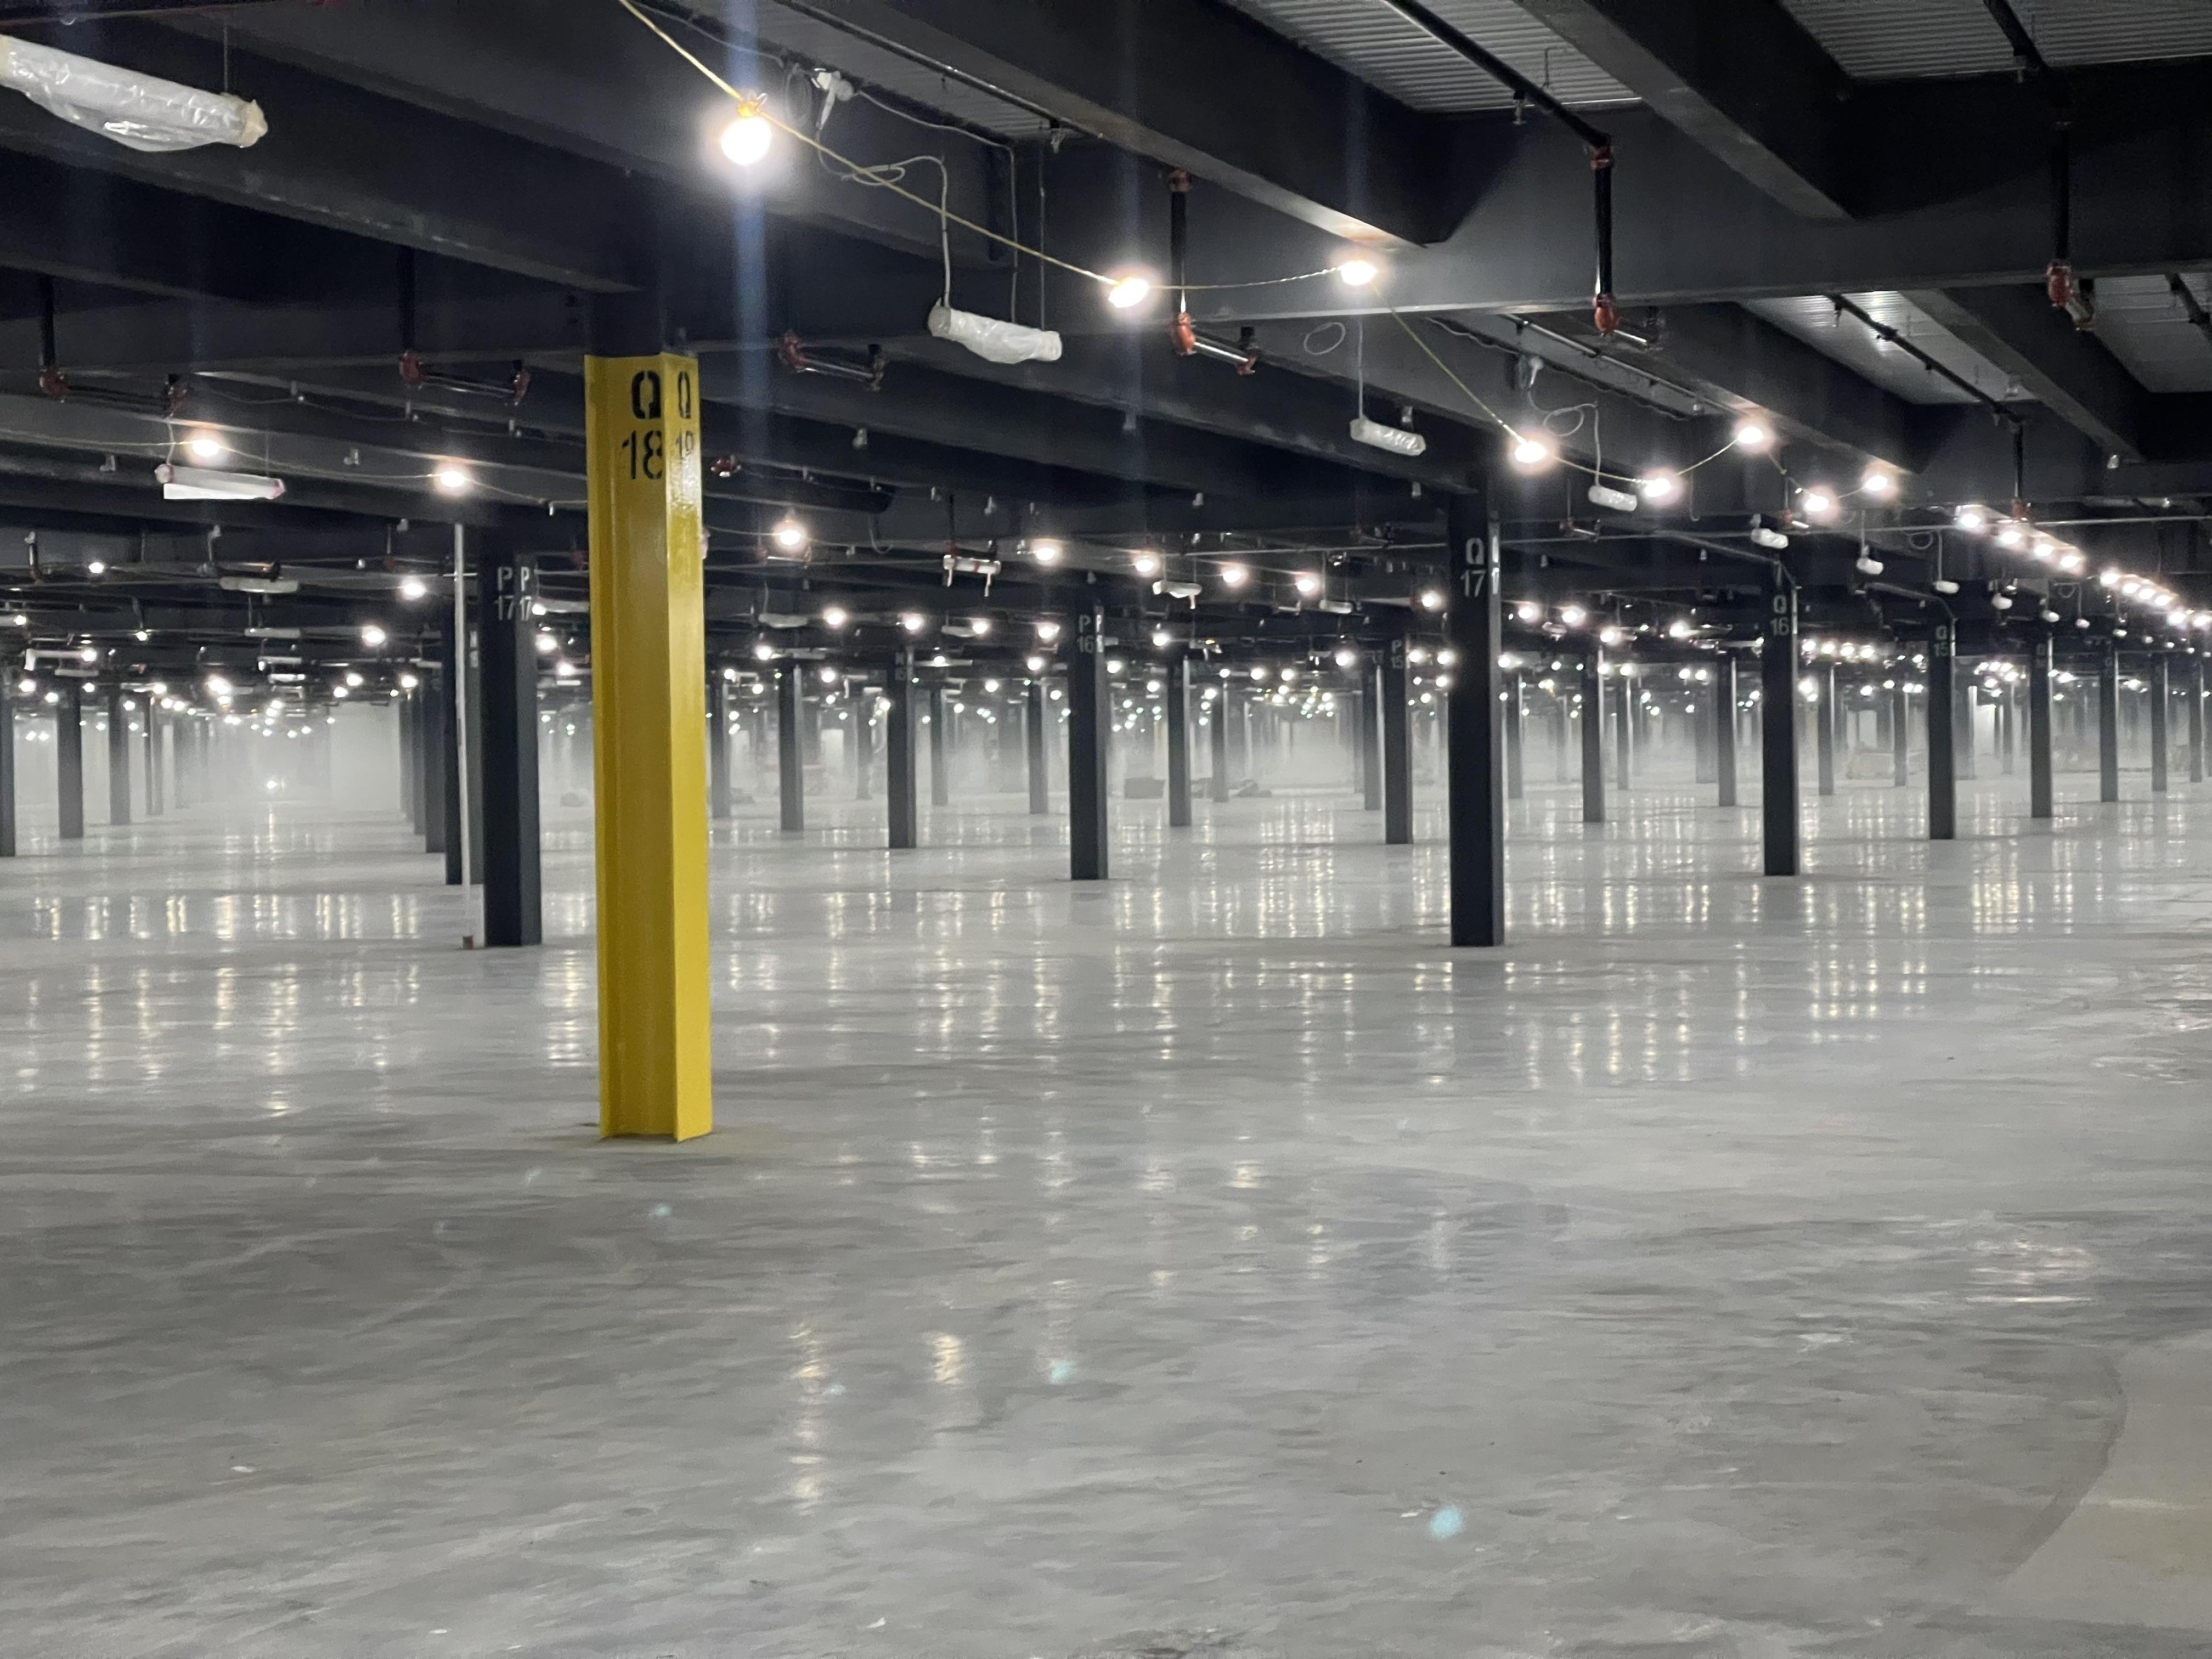 Fog forms naturally inside a new 650,000 sq ft Amazon fulfilment center on the fifth floor.